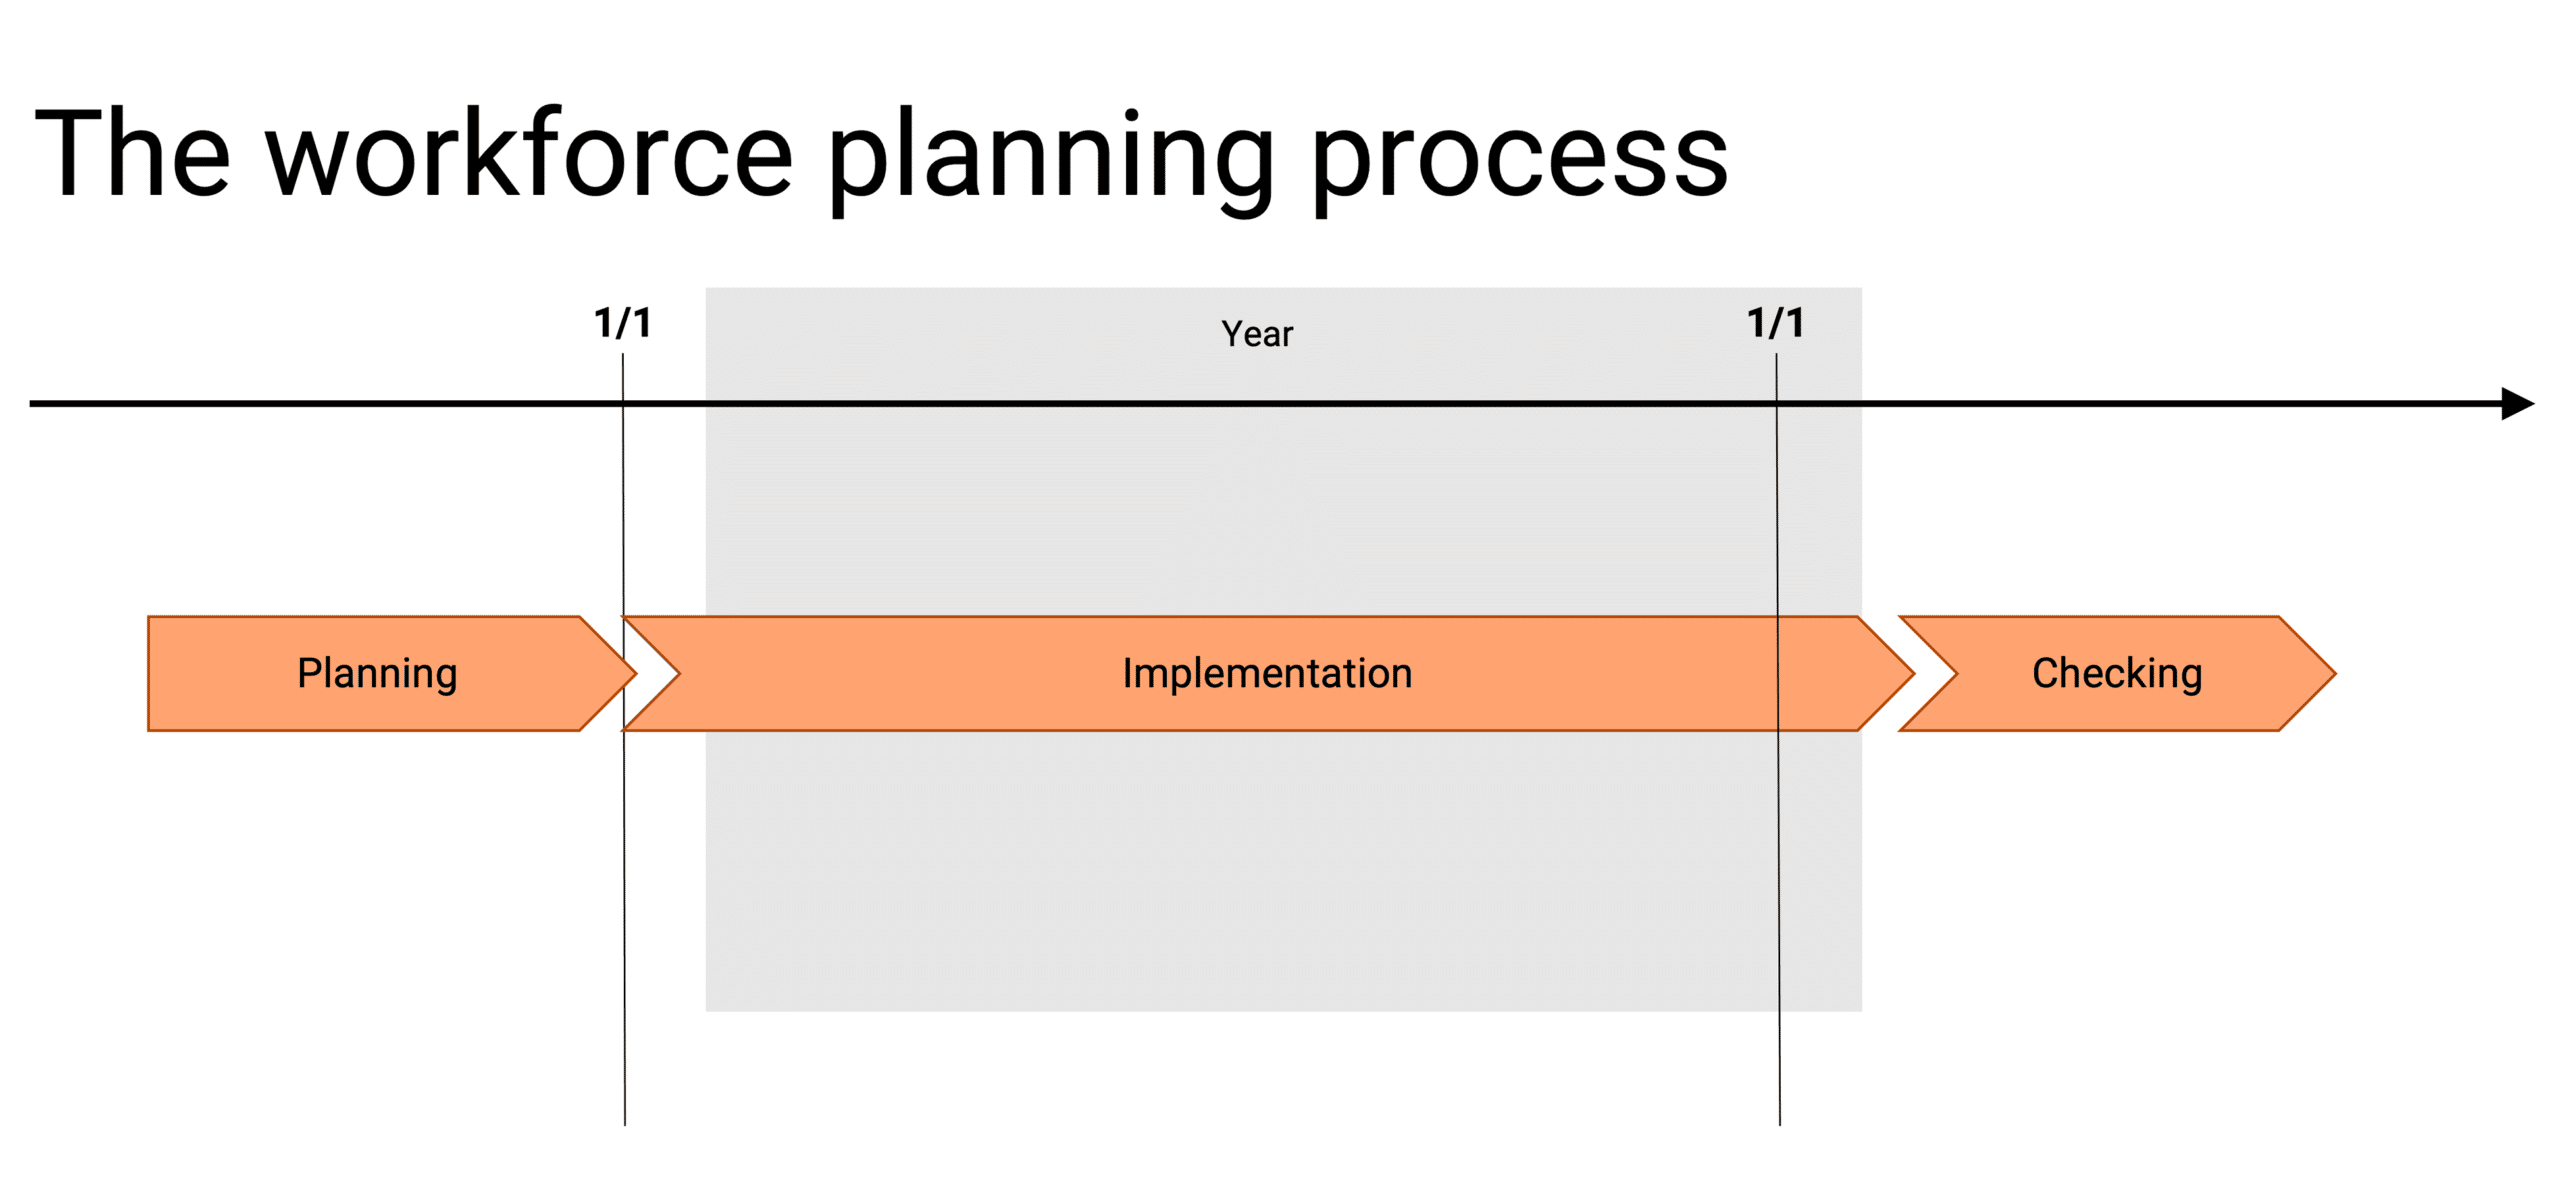 The workforce planning process